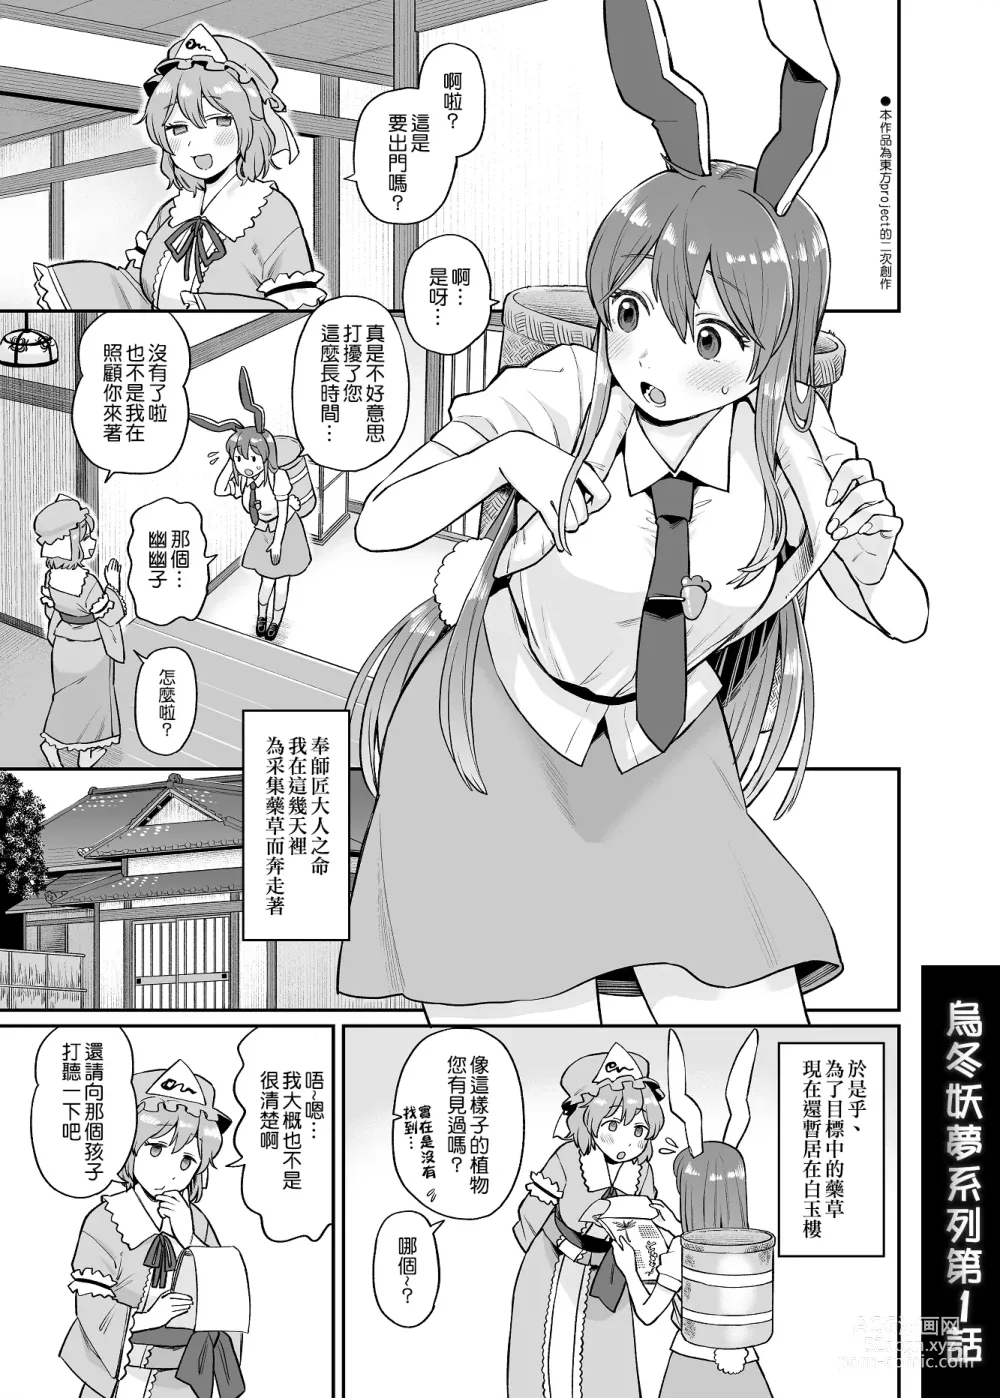 Page 1 of doujinshi 乌冬铃仙系列第1话